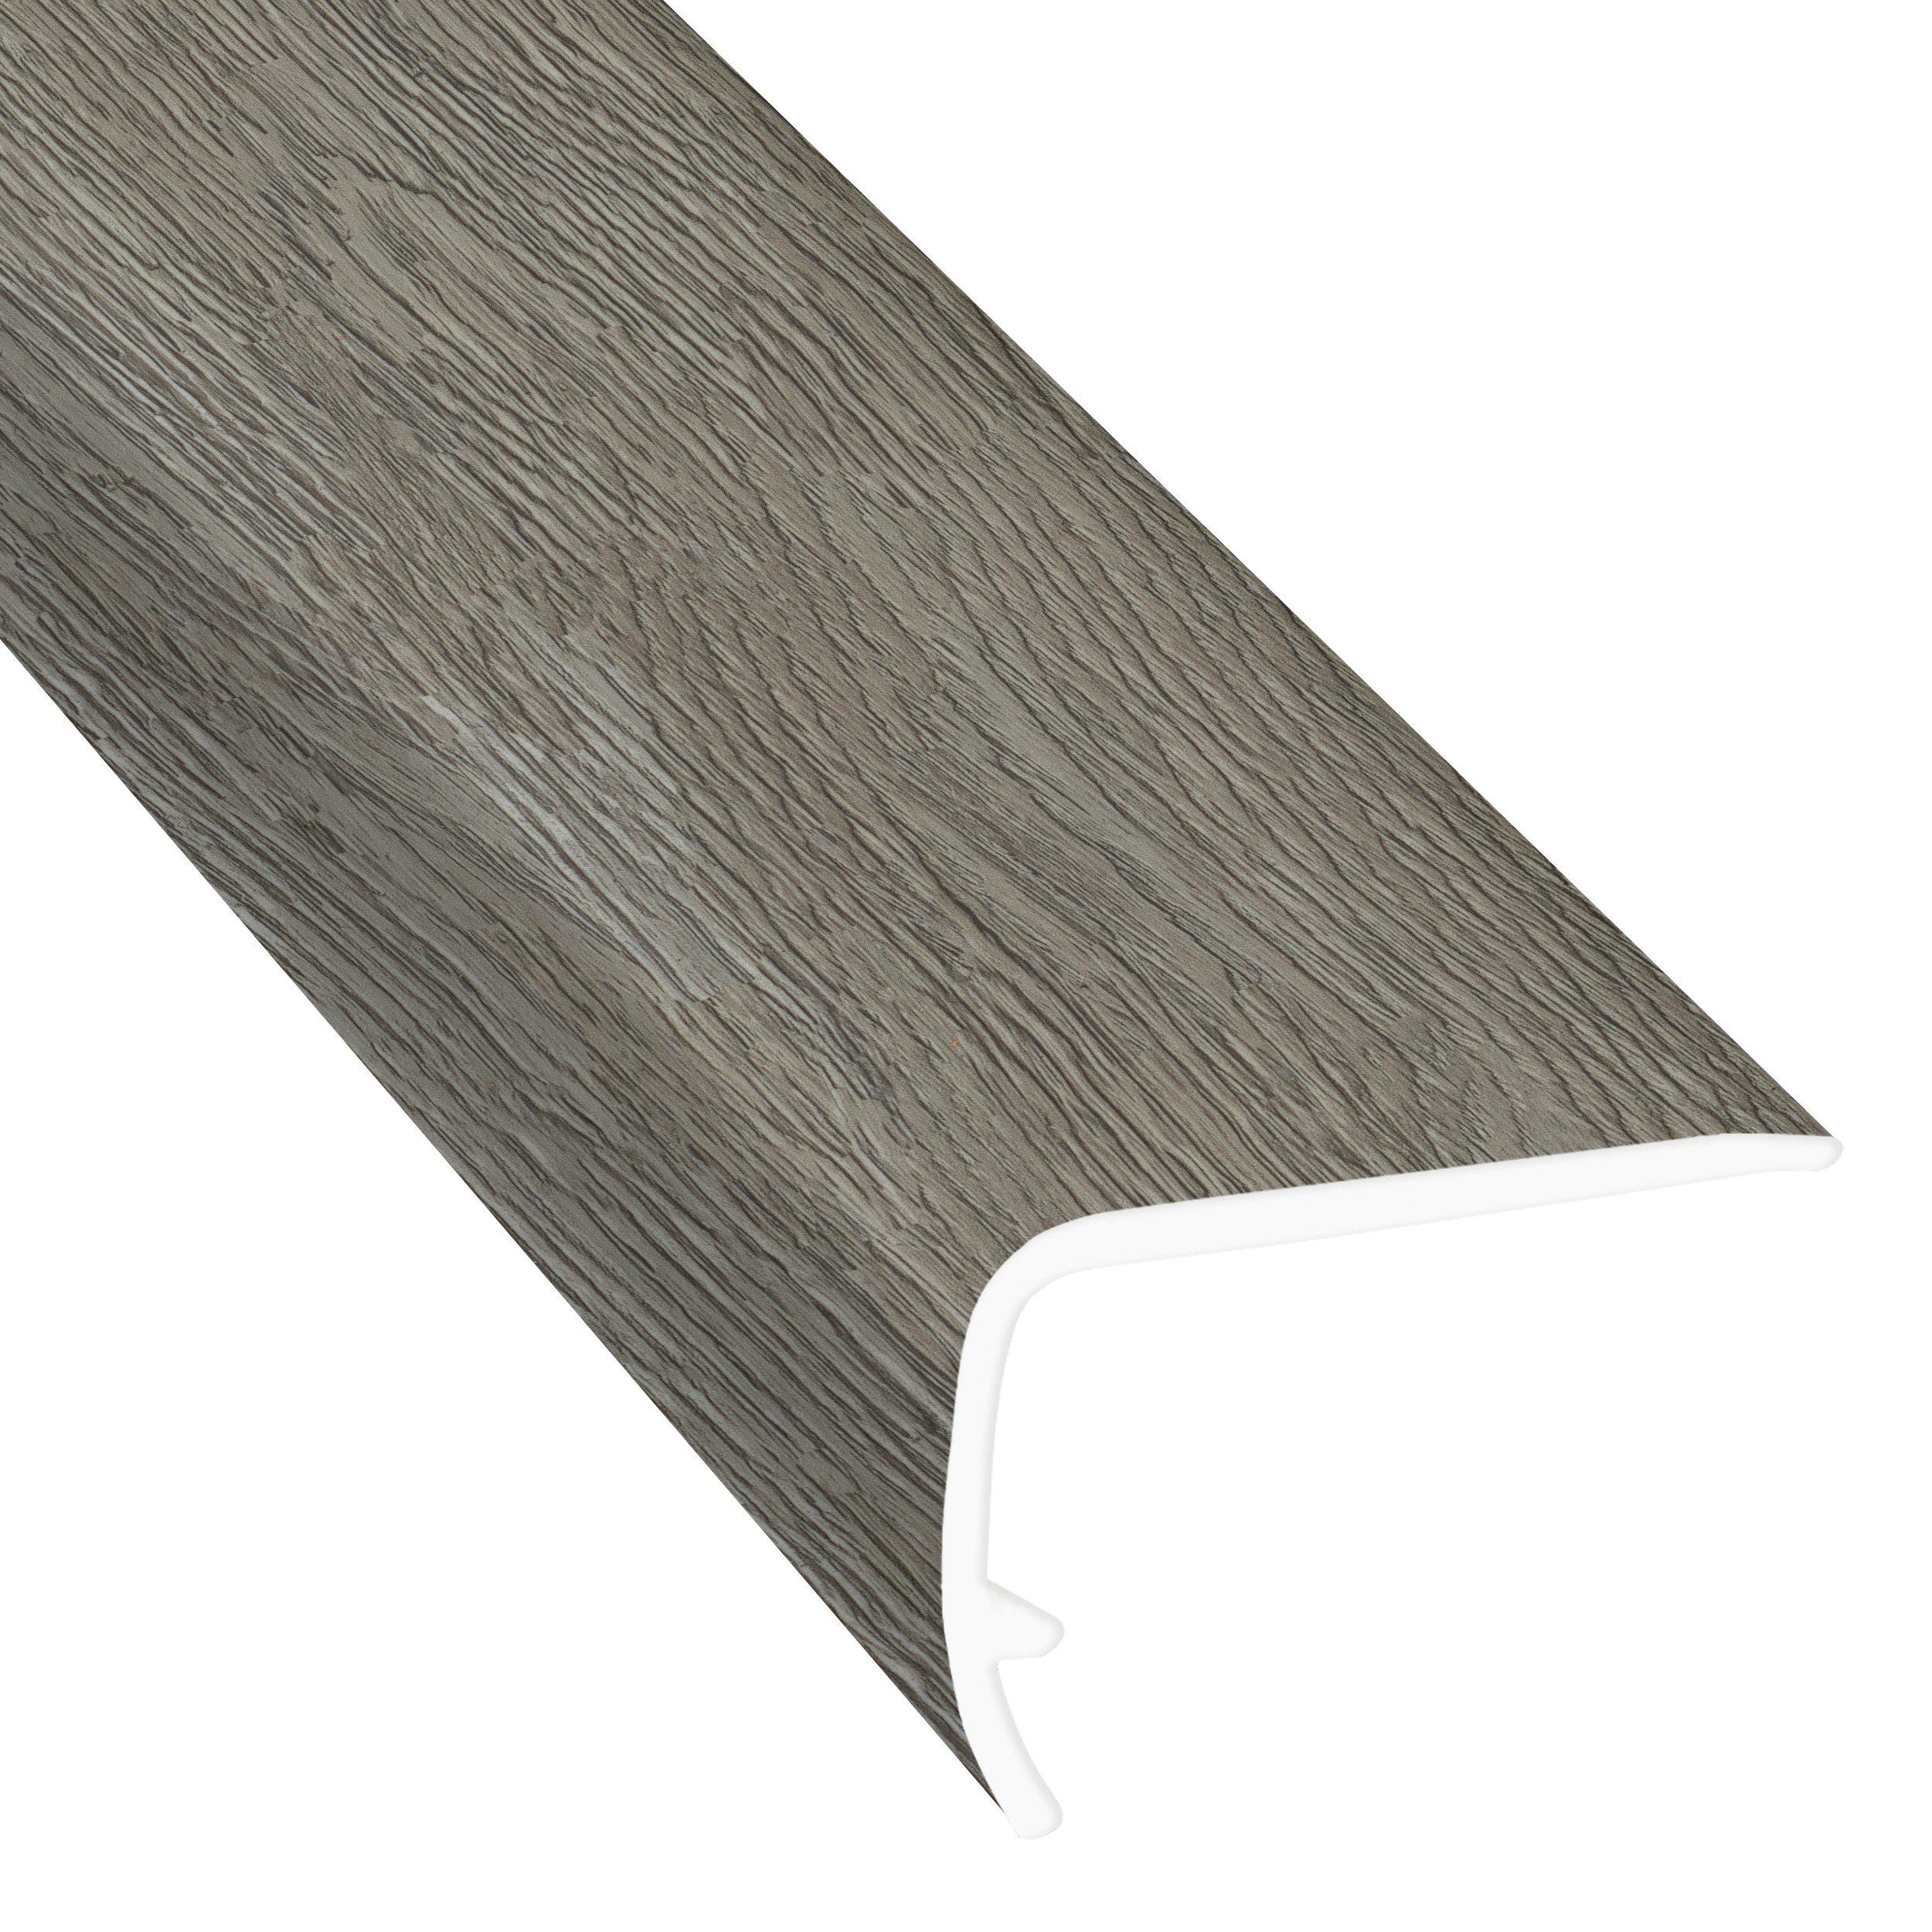 Color 5320F 94 in. Vinyl Overlapping Stair Nose